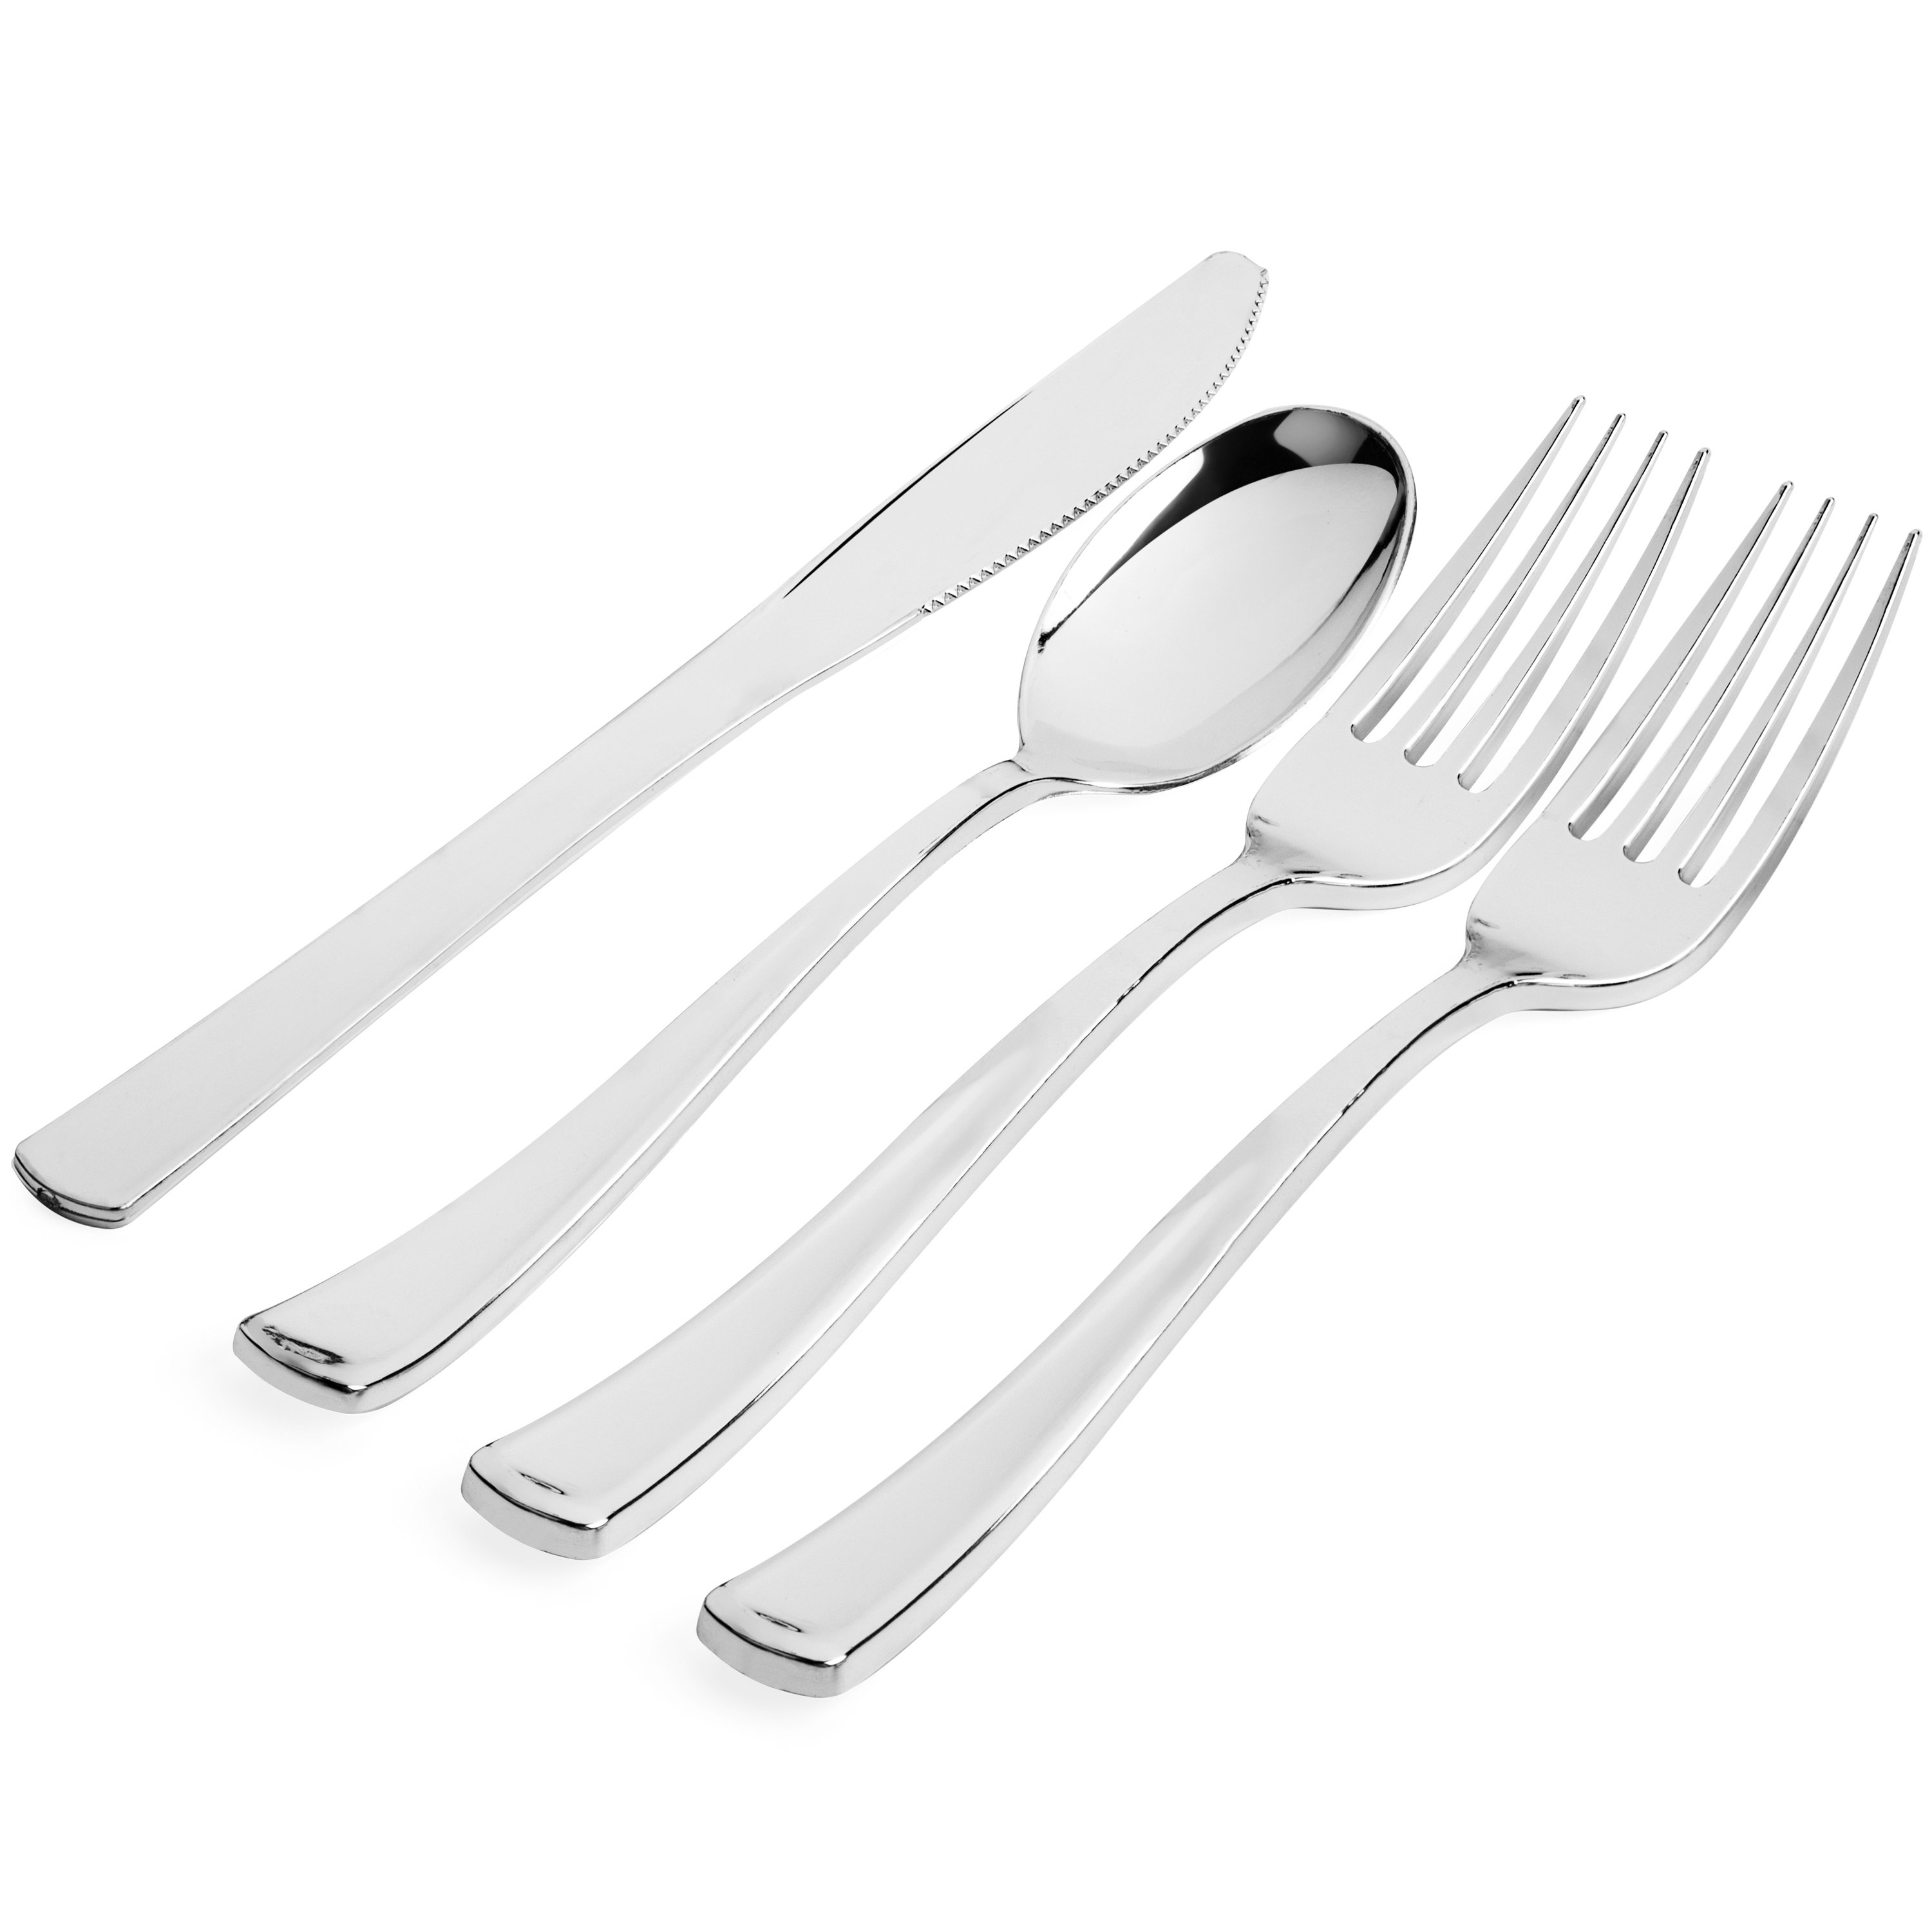 Exquisite 150 Pack Black Plastic Utensils Heavy Duty Cutlery Set 50 Plastic  Forks 50 Plastic Spoons 50 Plastic Knives Perfect Plastic Silverware Party